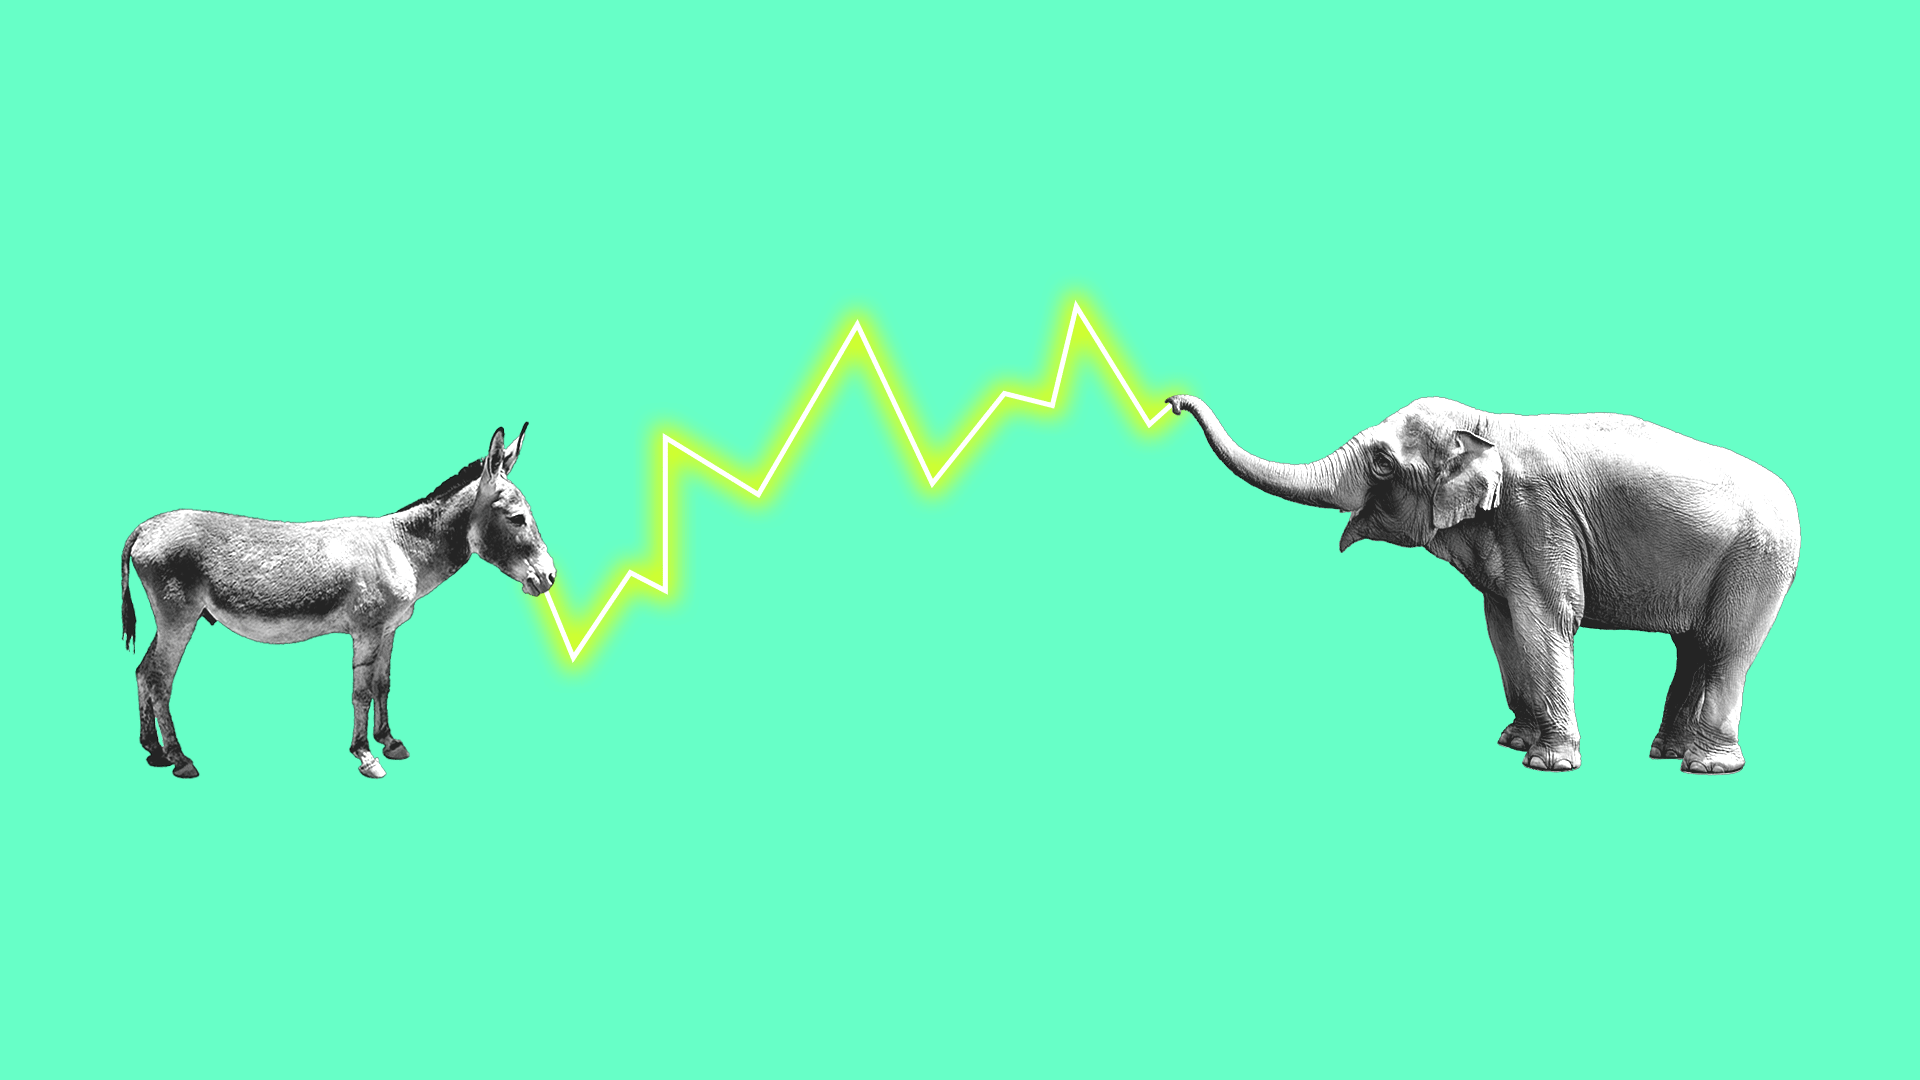 Illustration of energy surging between an elephant and a donkey